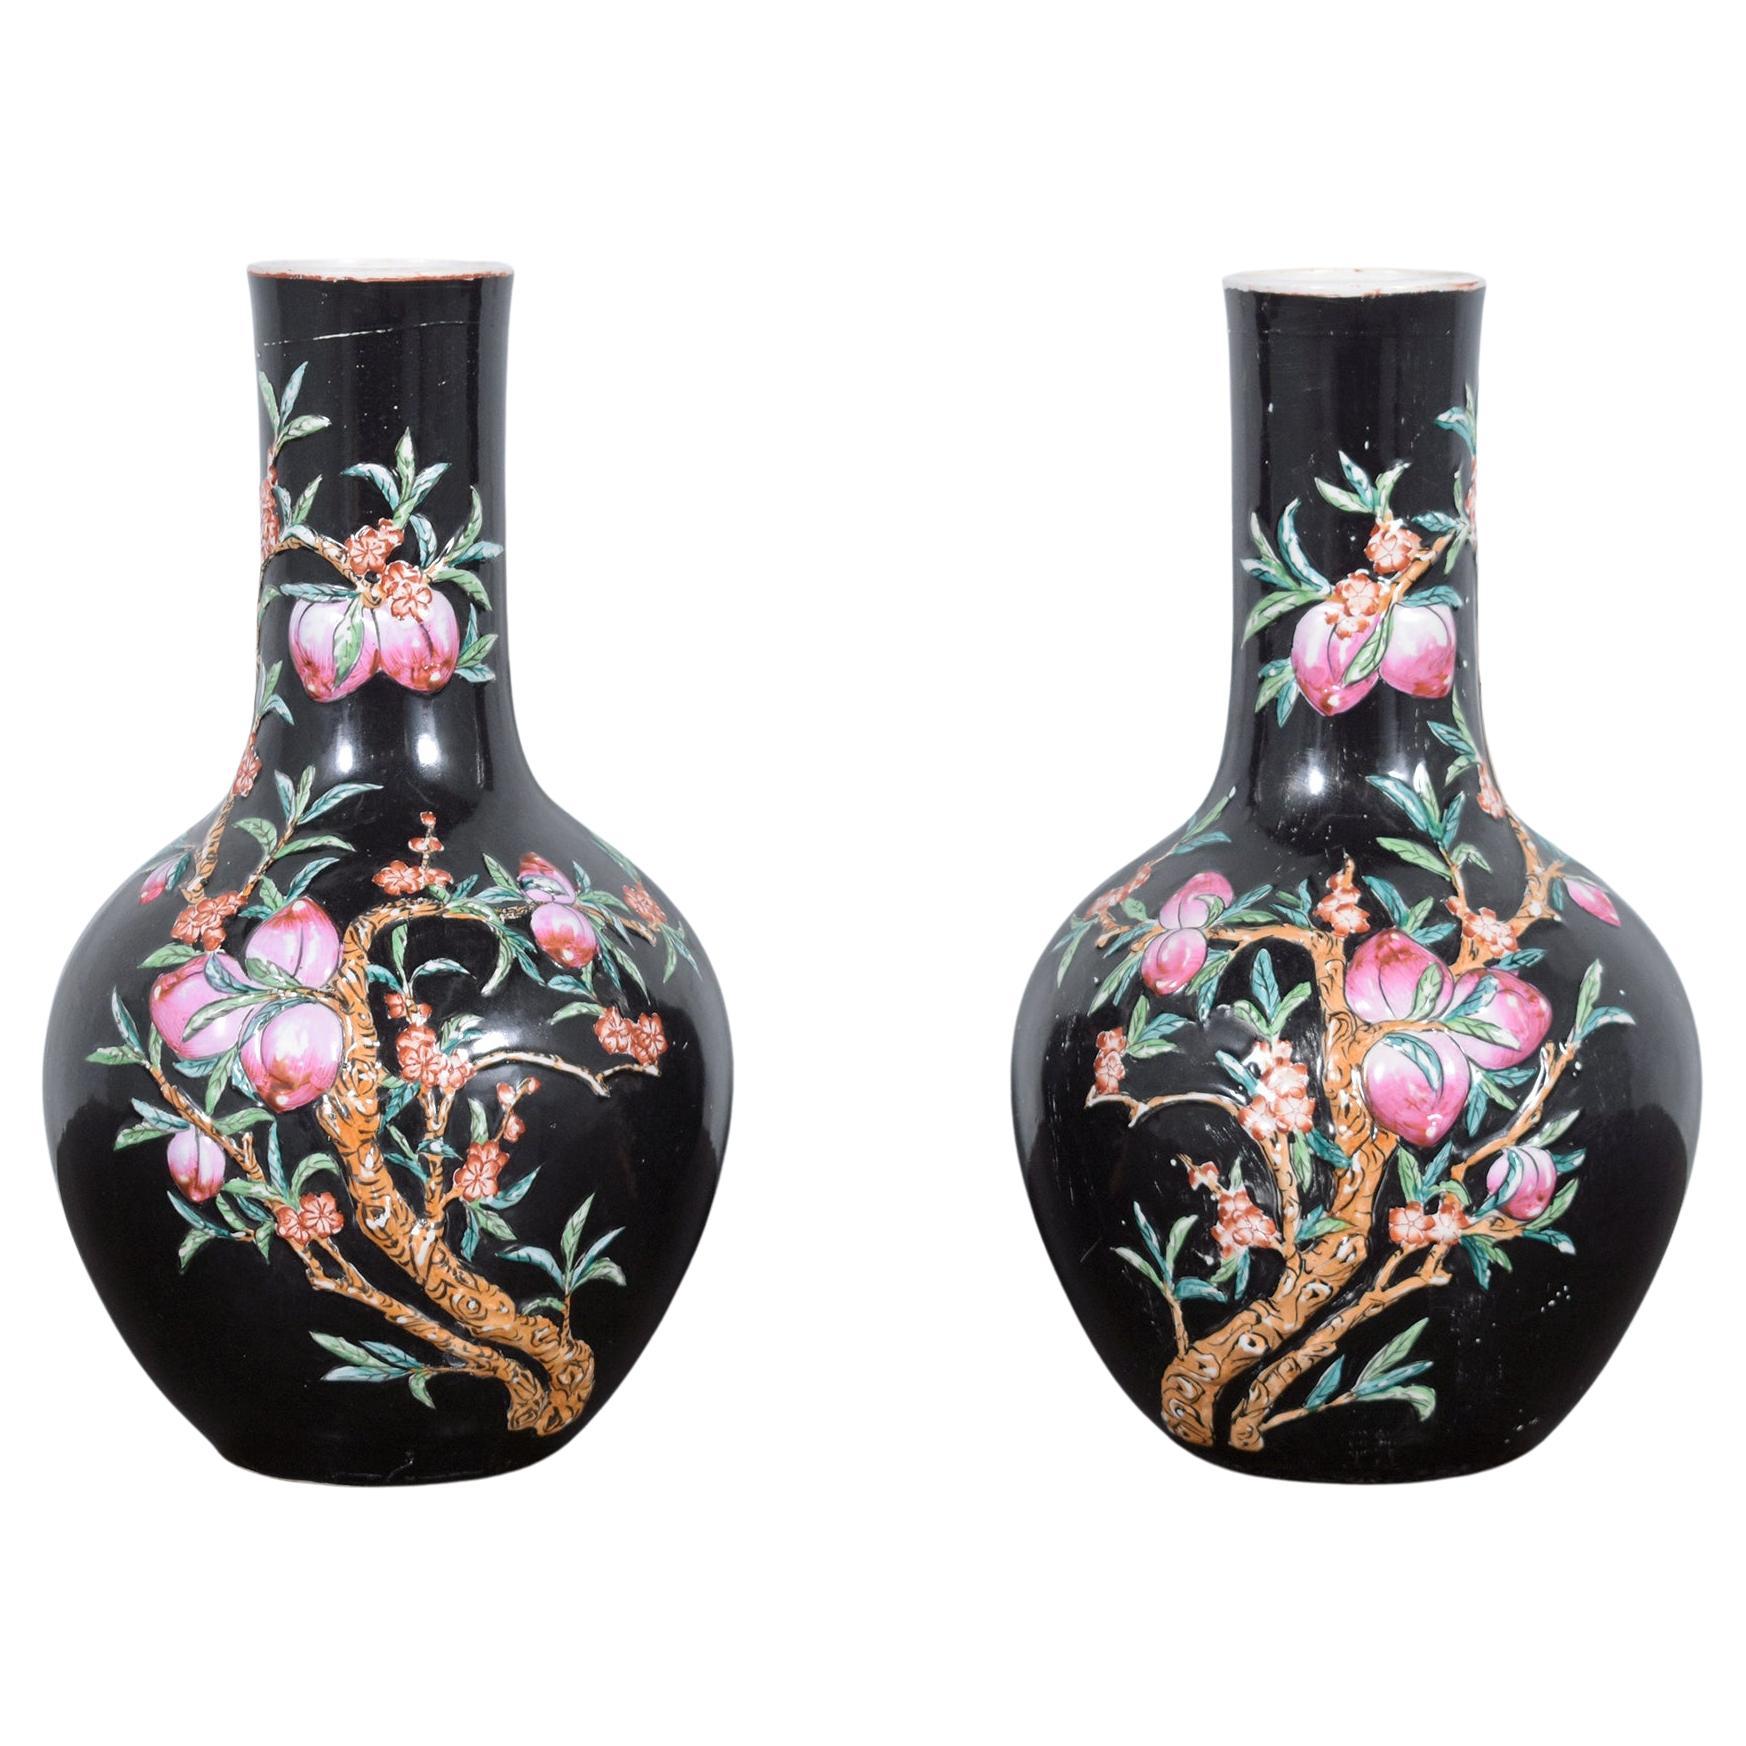 Pair of Vintage Hand-Painted Chinese Porcelain Vases with Floral & Fruit Pattern For Sale